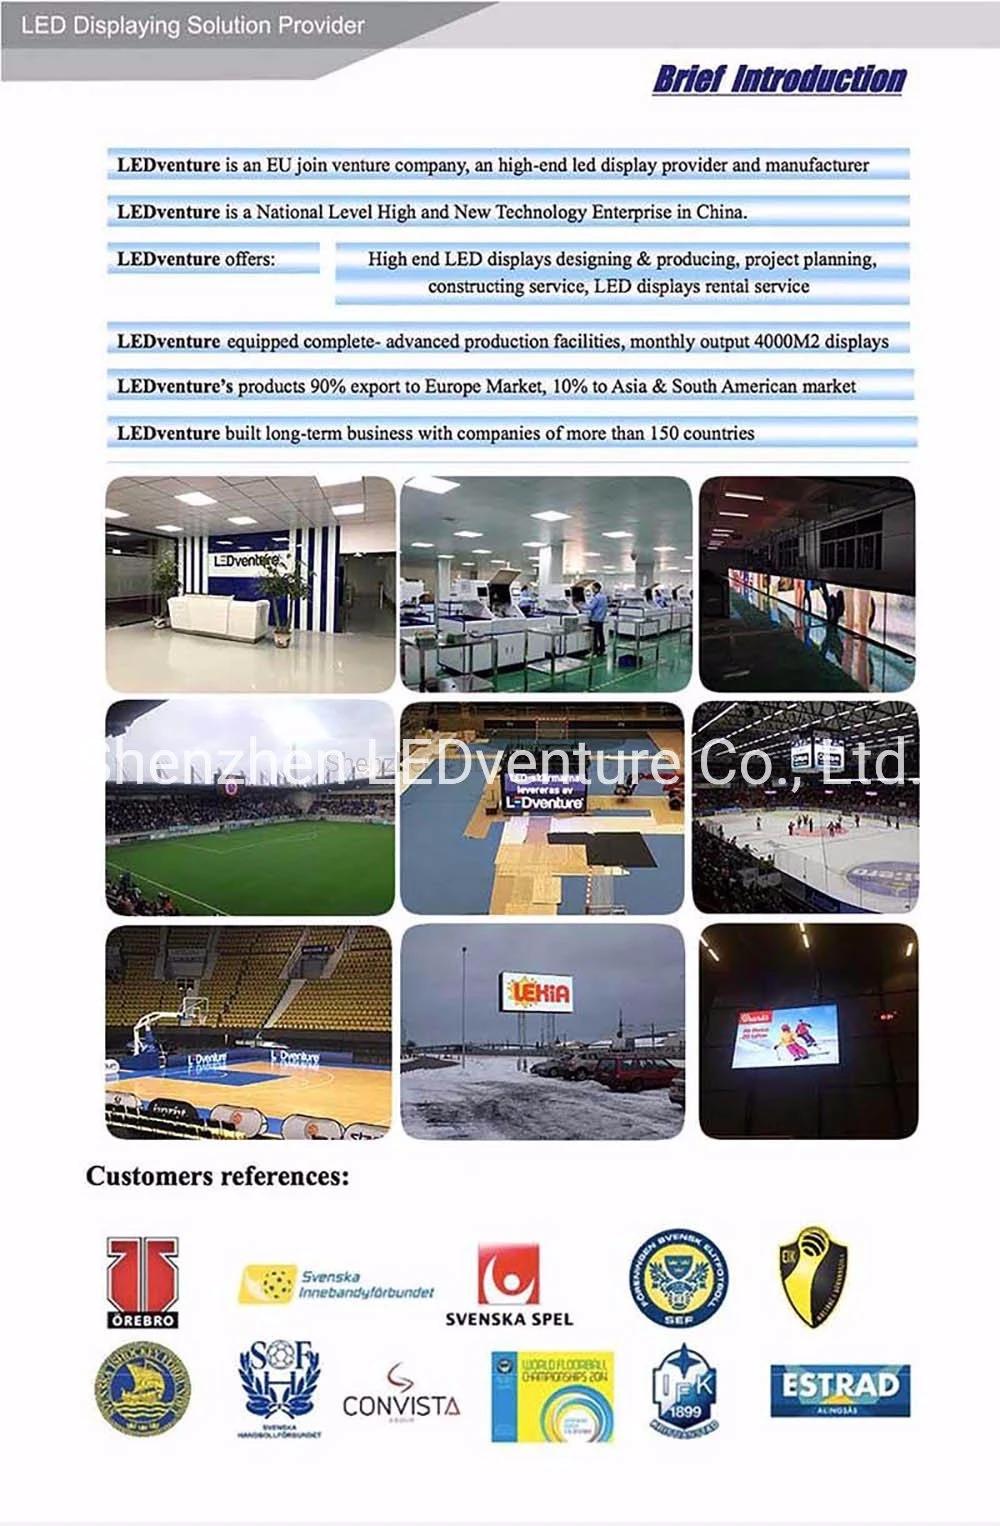 Full Color P20 Front Service Video Wall Screen Outdoor Advertising LED Display Billboard